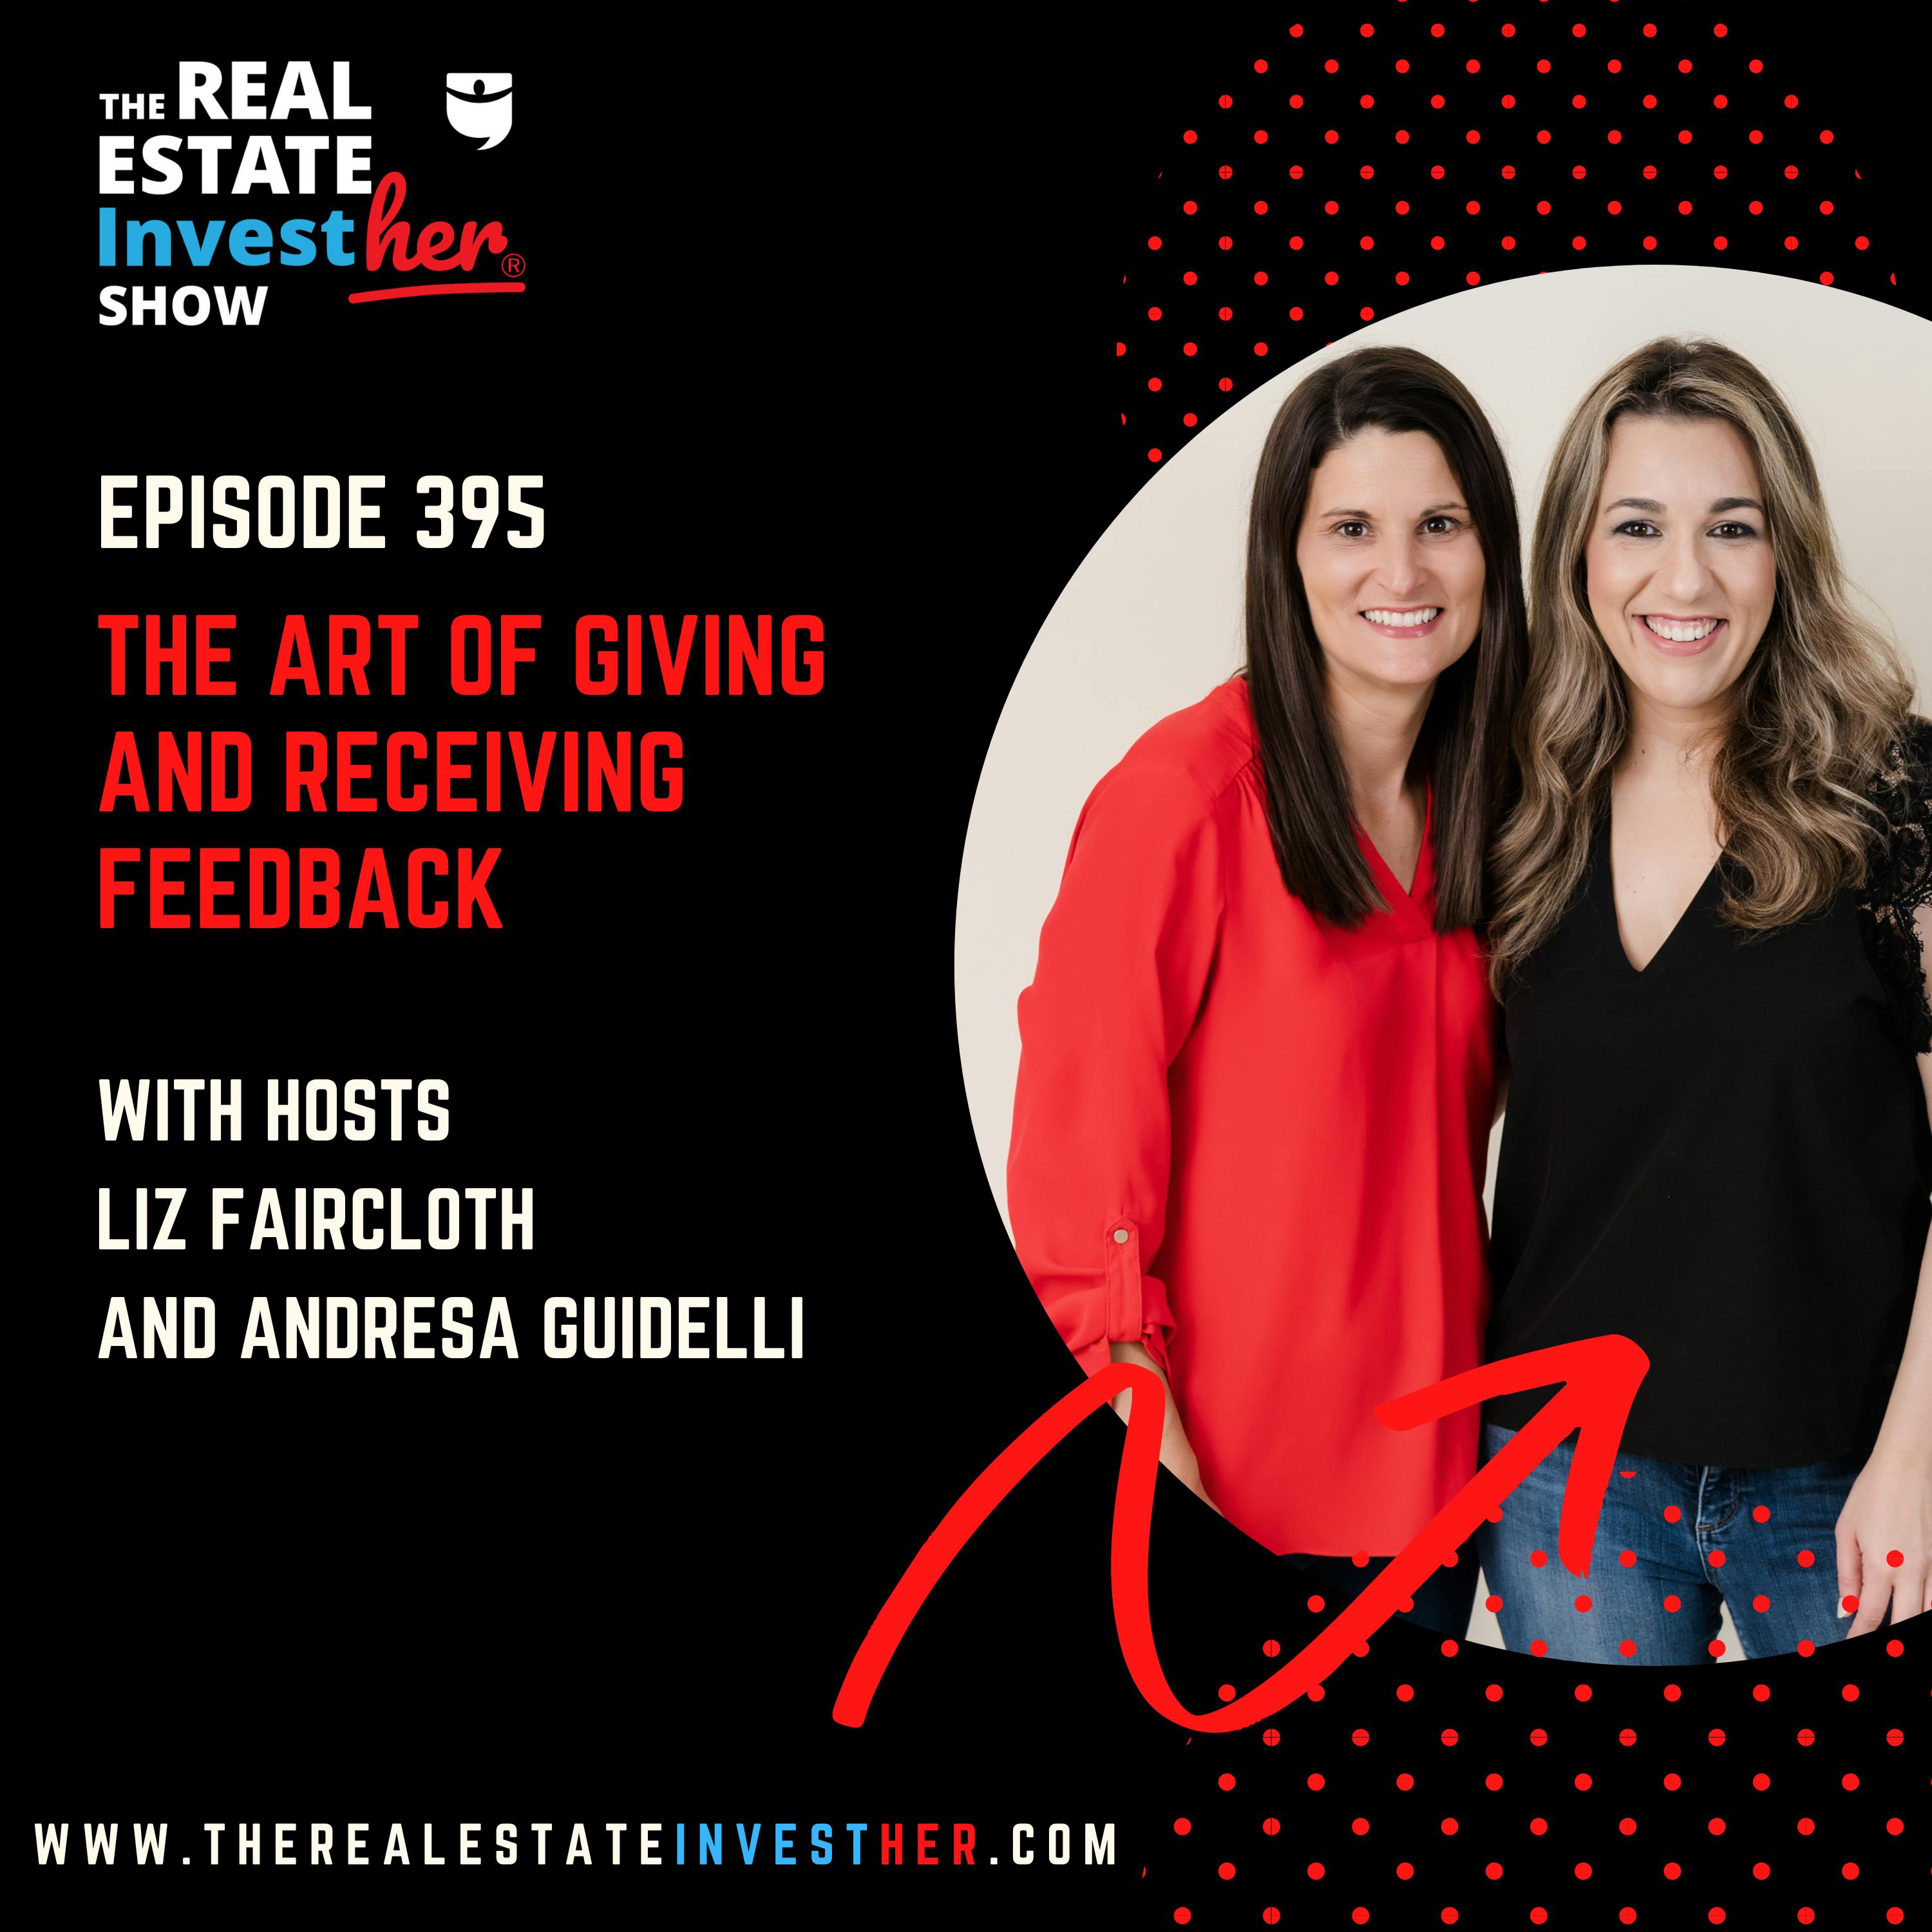 The Art of Giving and Receiving Feedback (Minisode)